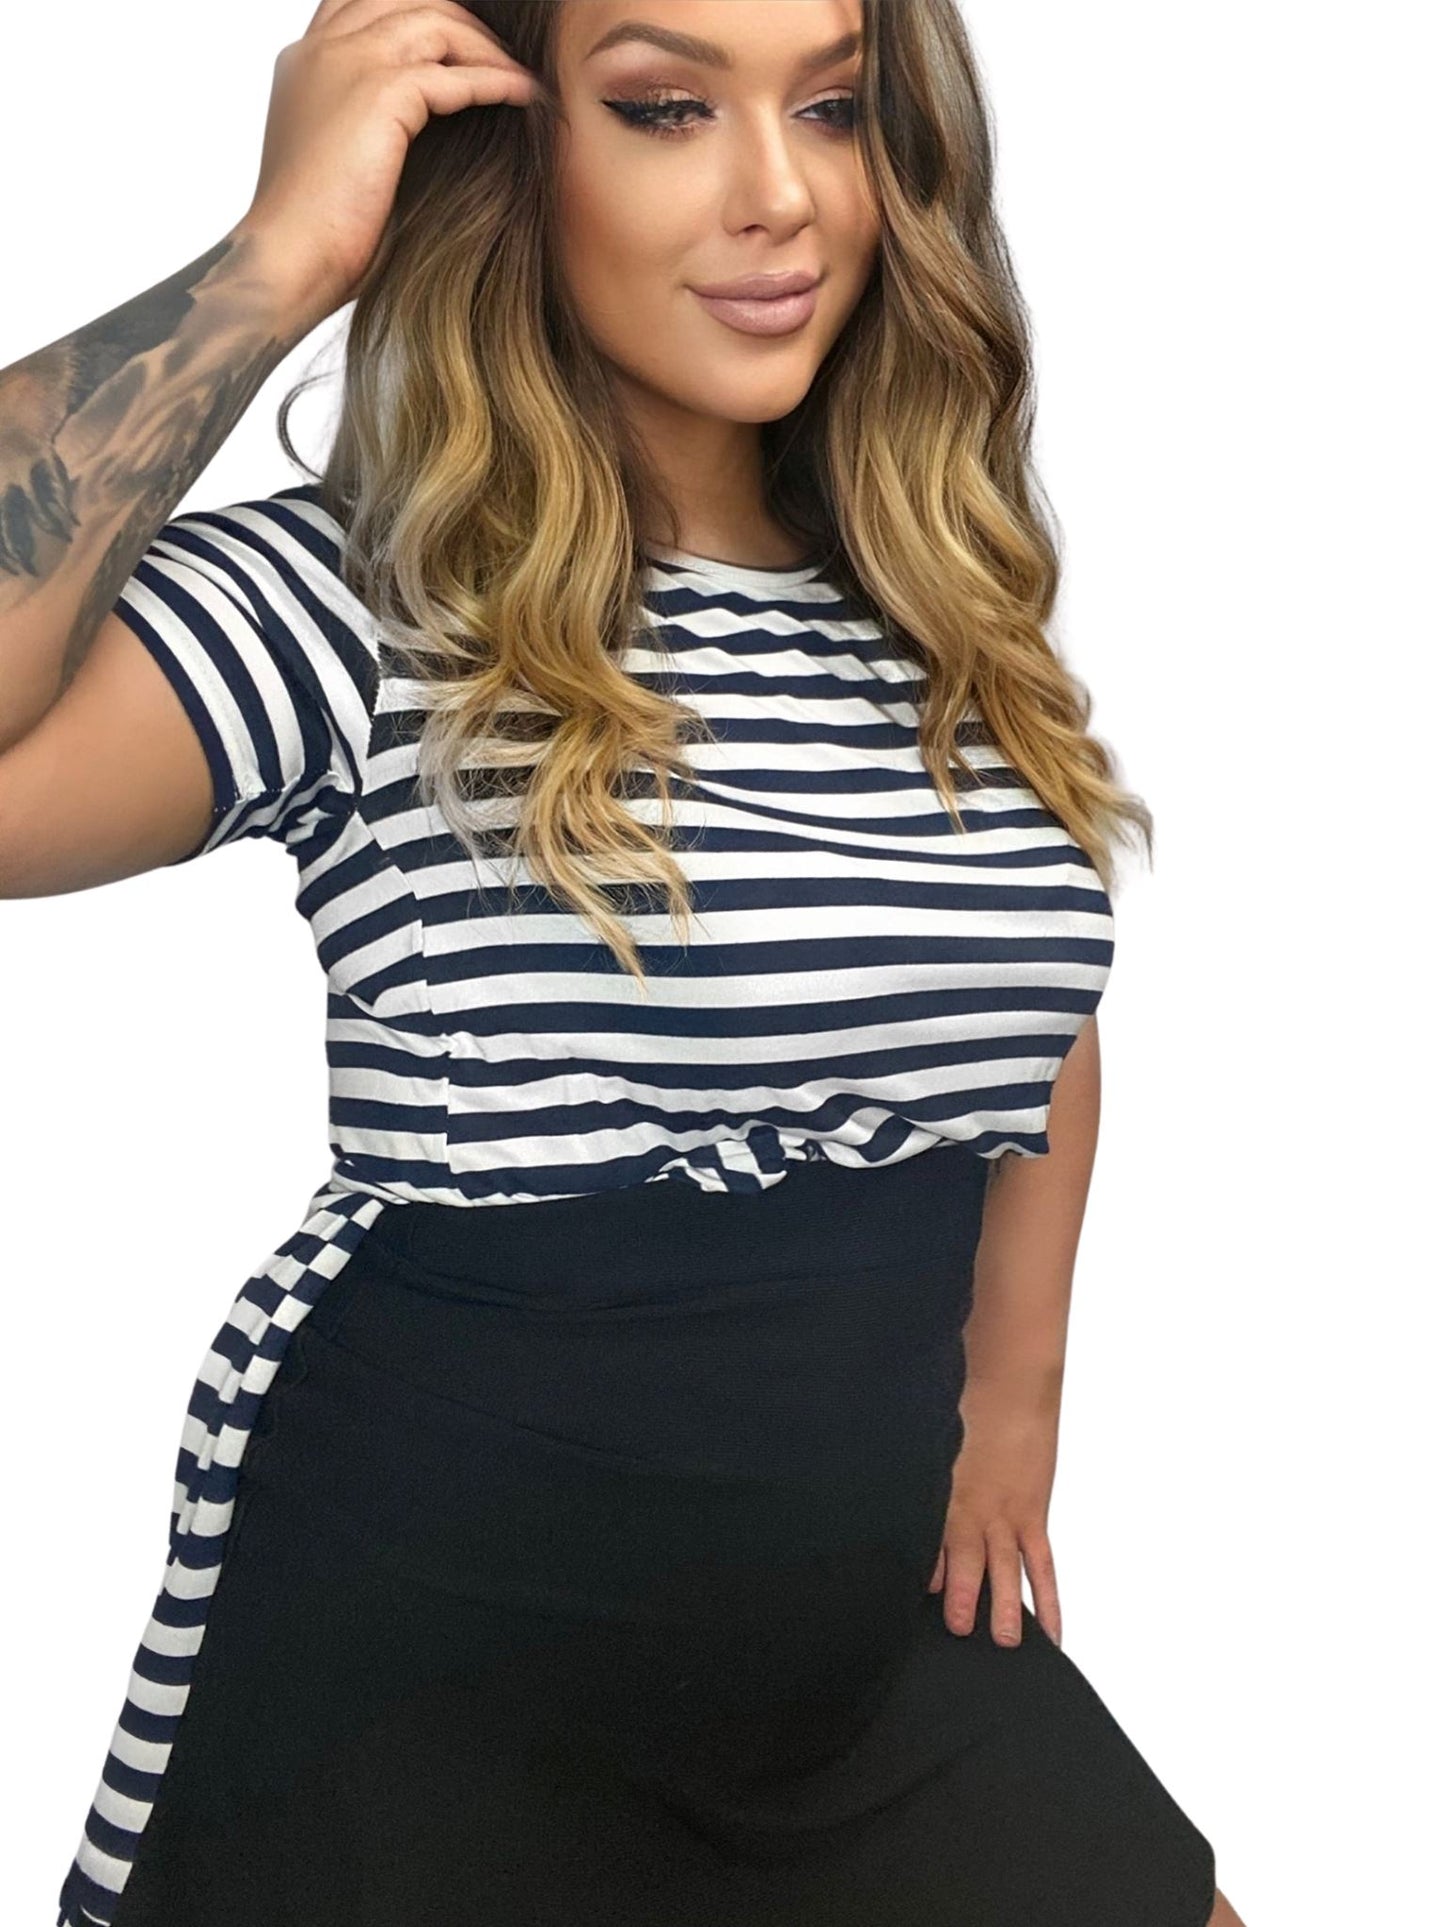 PENELOPE Striped Navy blue and white knot/Slit T-shirt Tshirt Aambers Goodies xx 